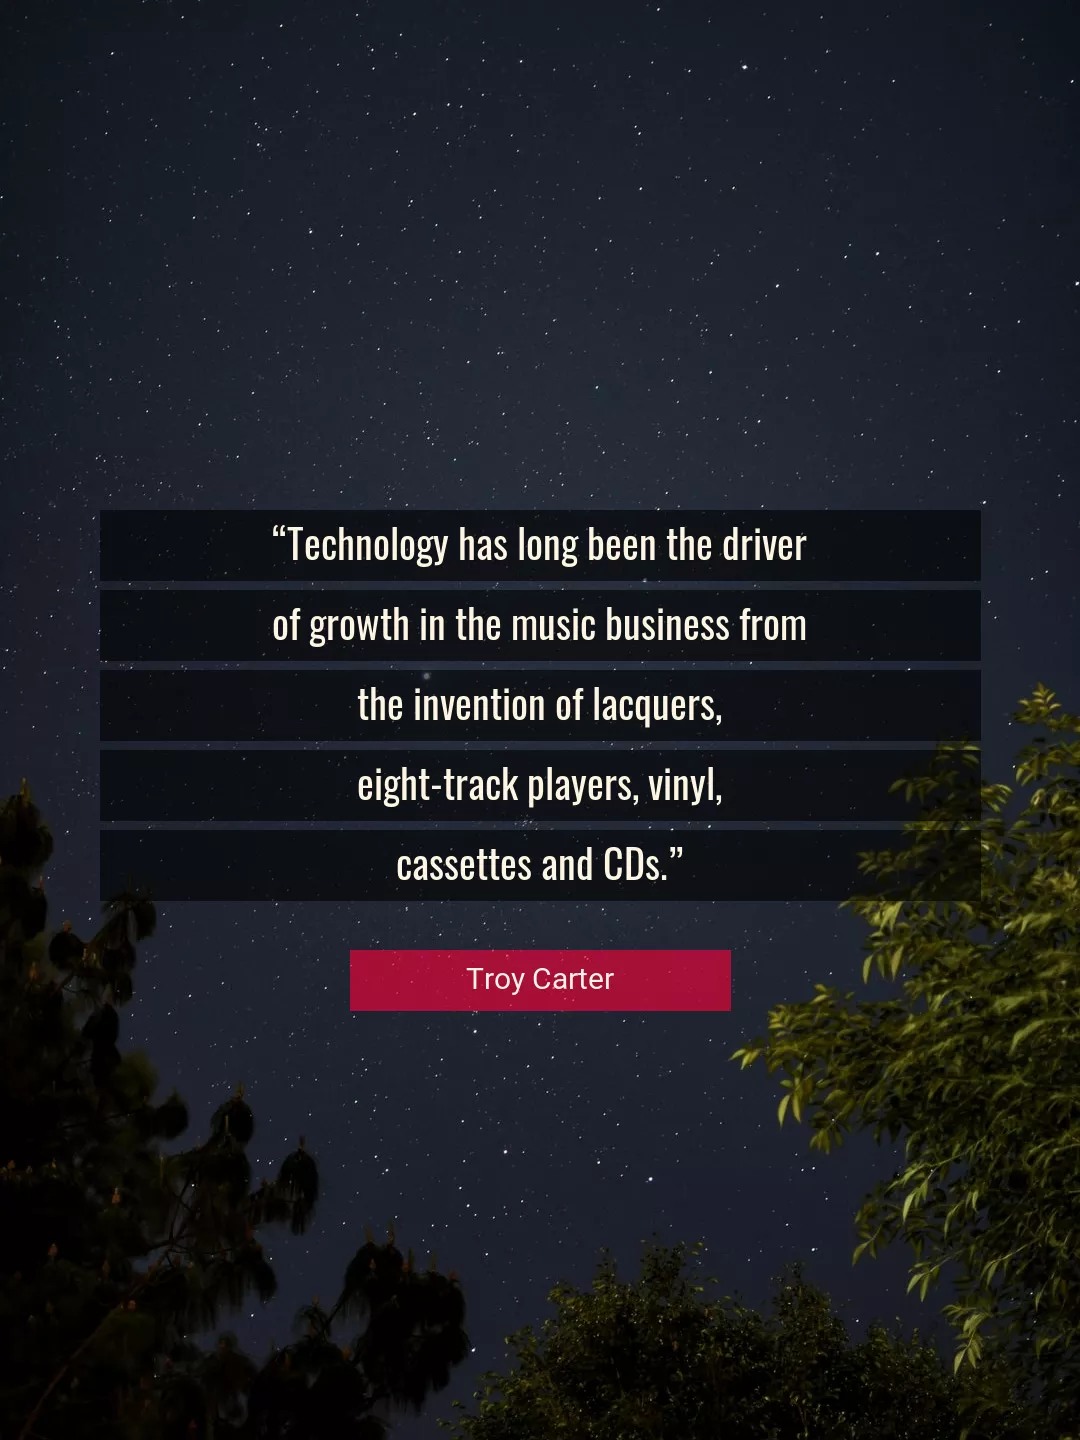 Quote About Technology By Lu Guanqiu